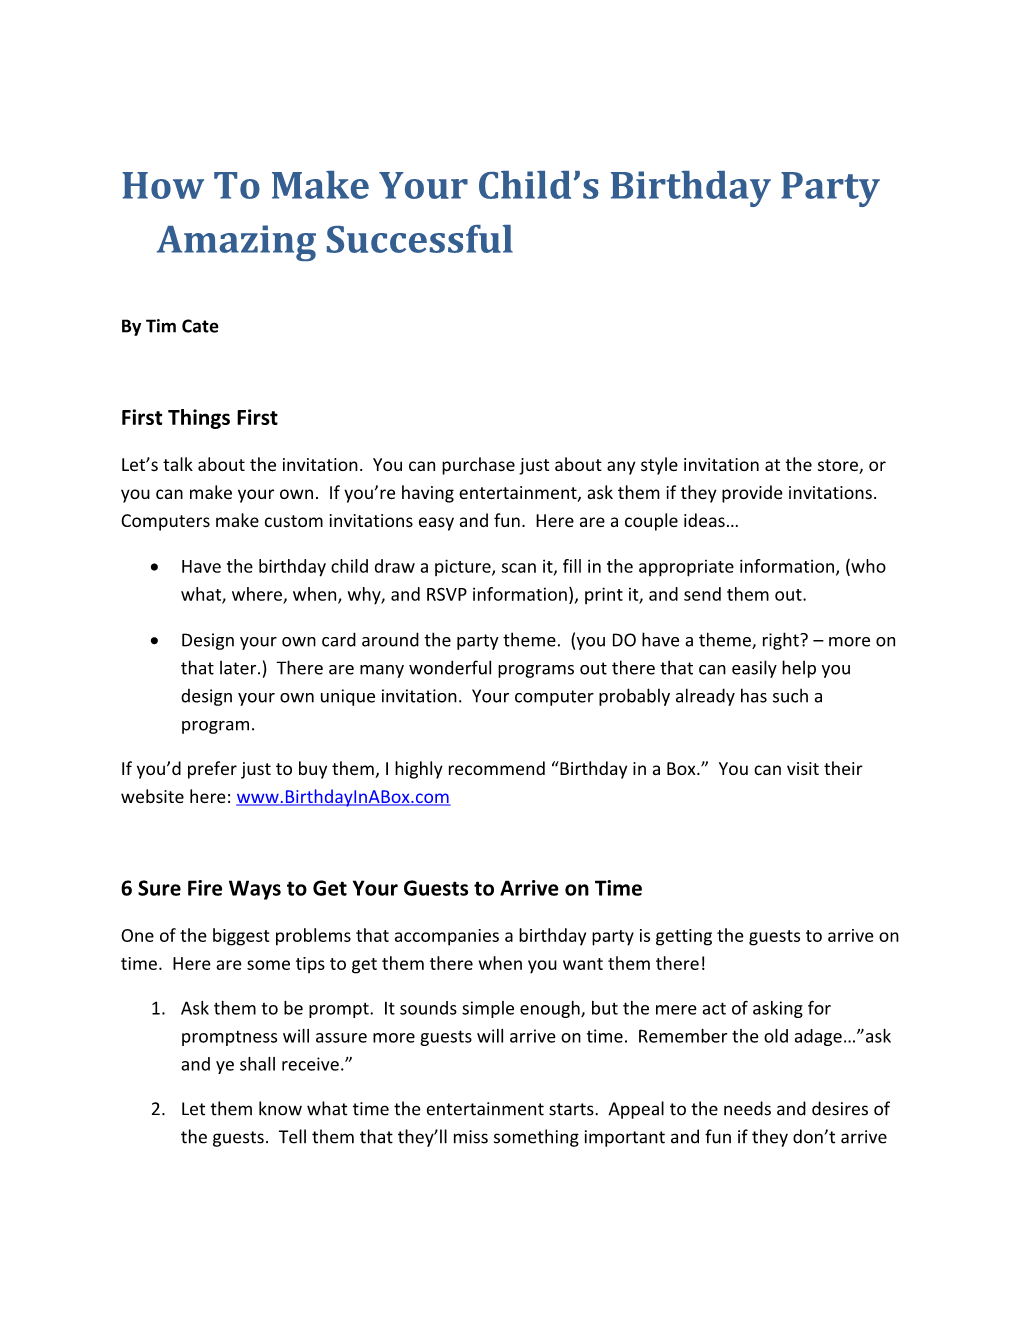 How to Make Your Child S Birthday Party Amazing Successful